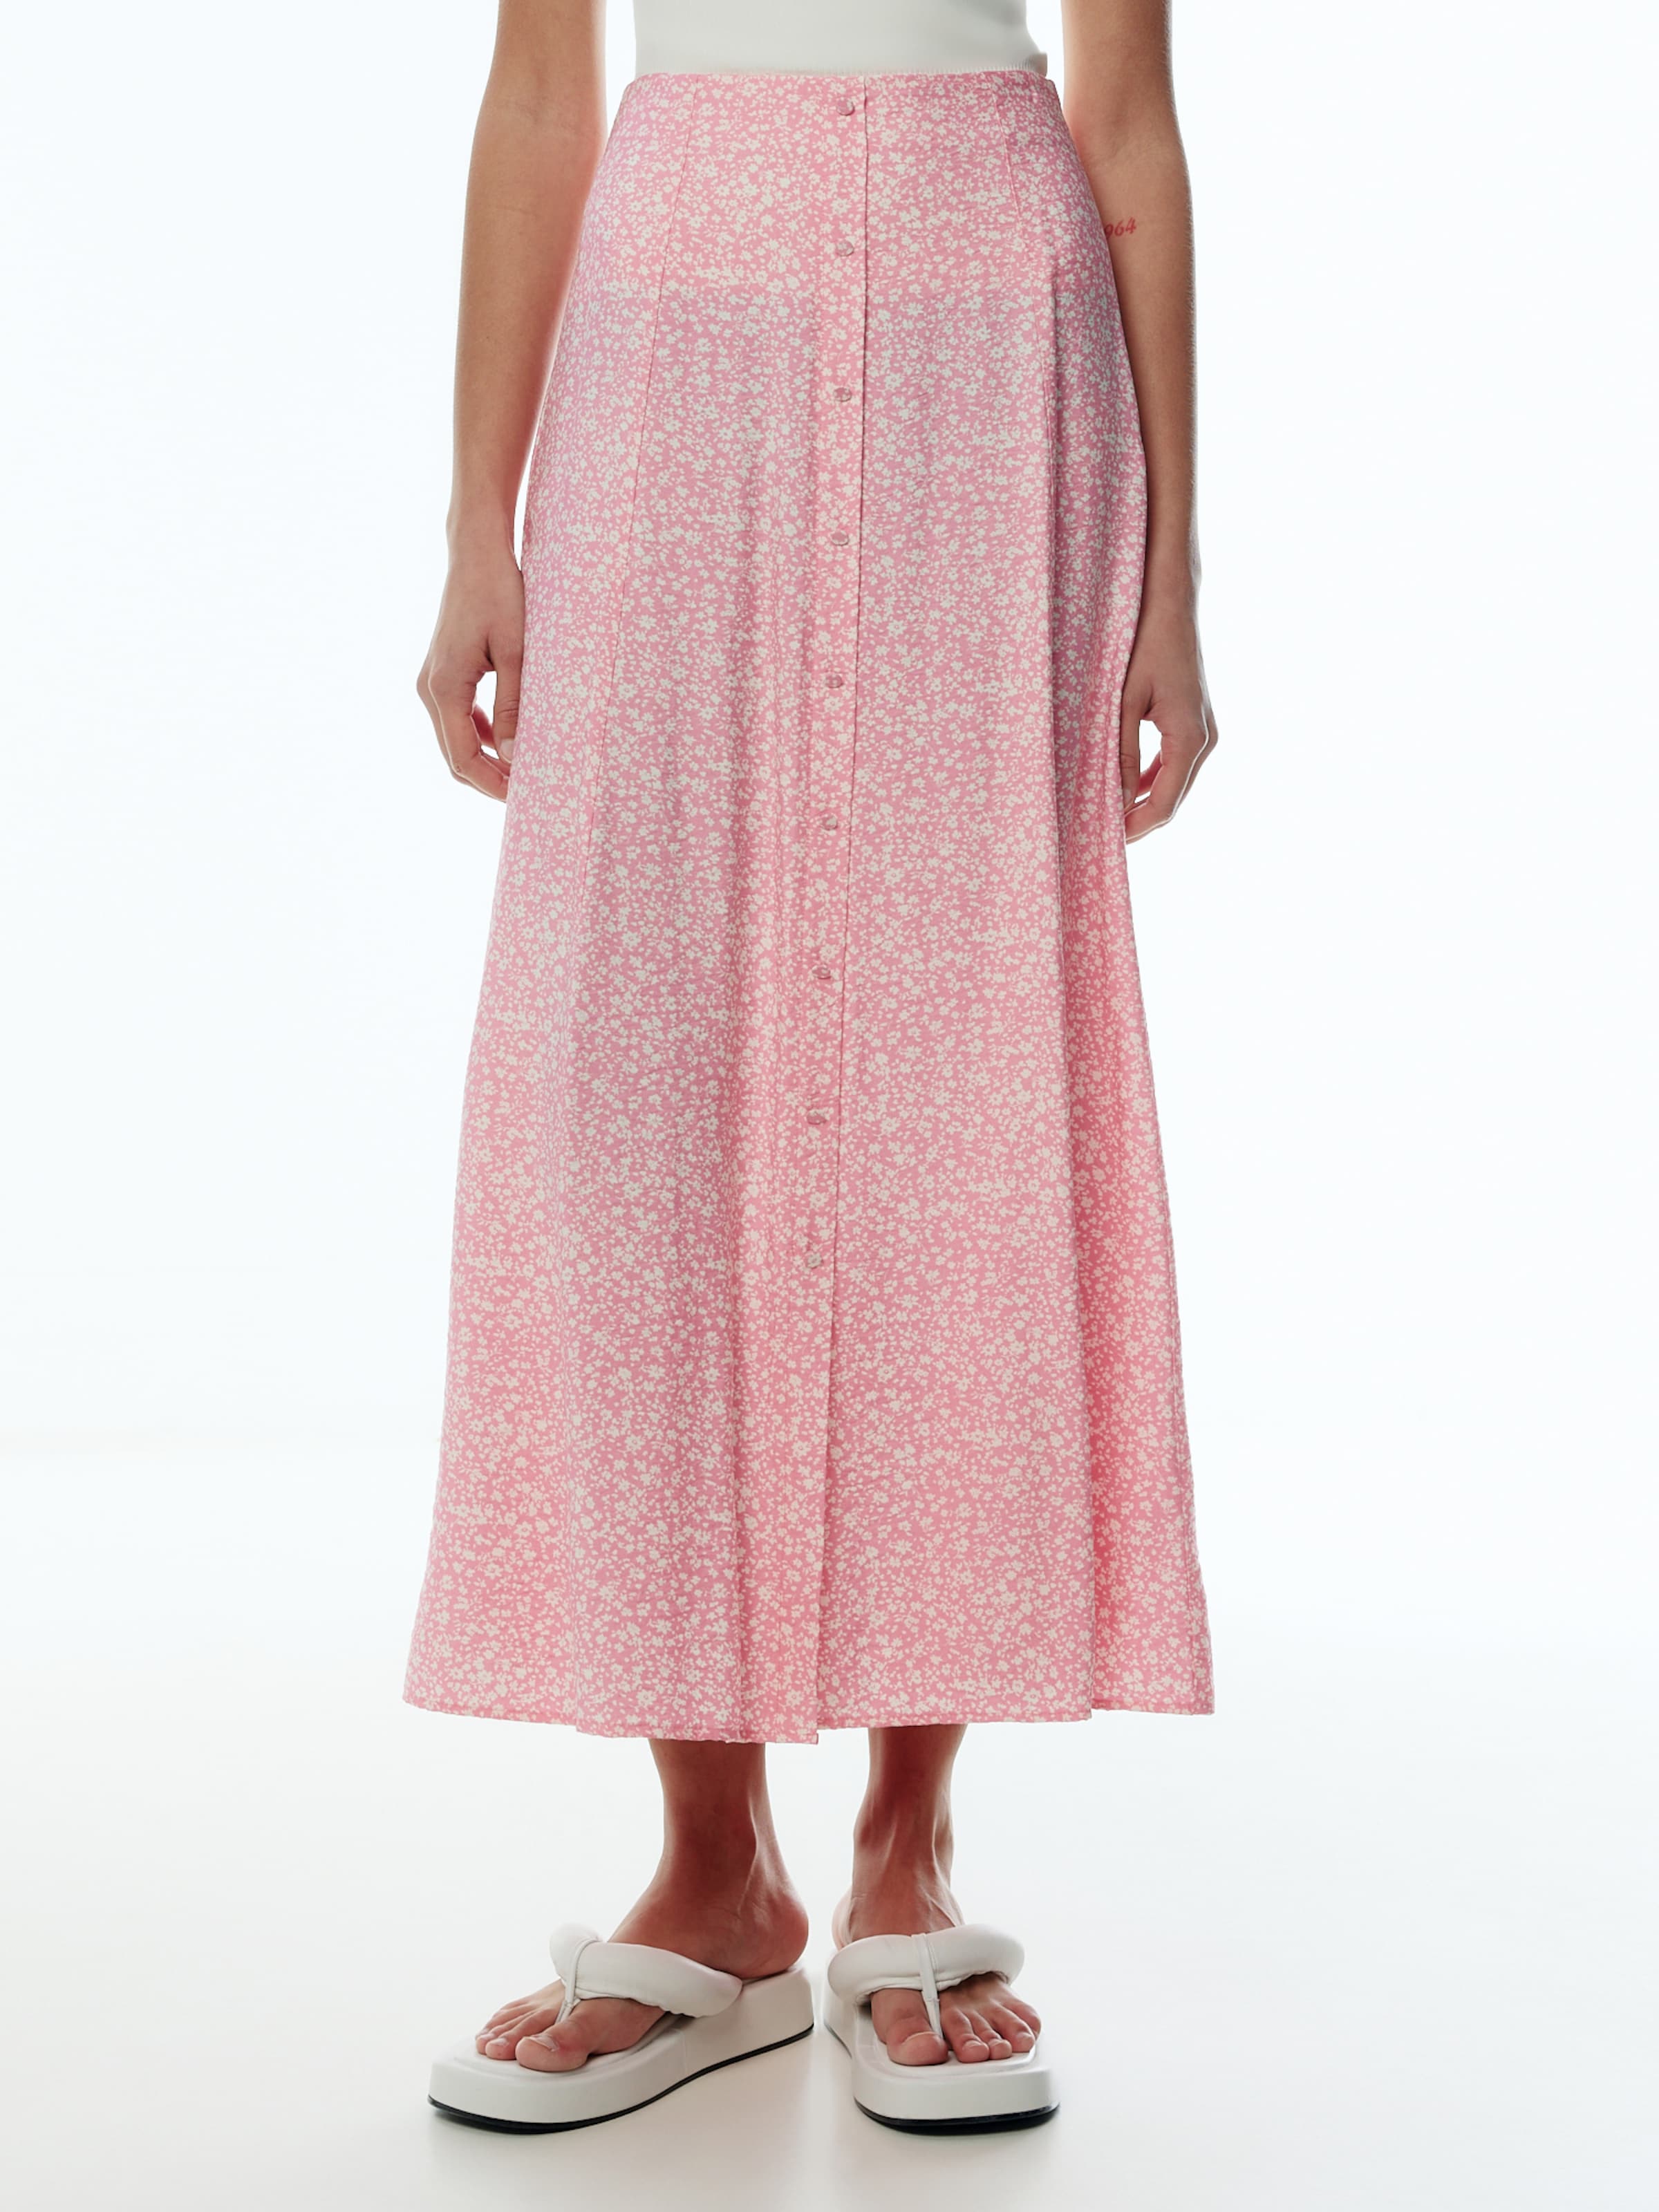 Maxi Skirts: Shop Maxi Skirts for Women | Forever 21